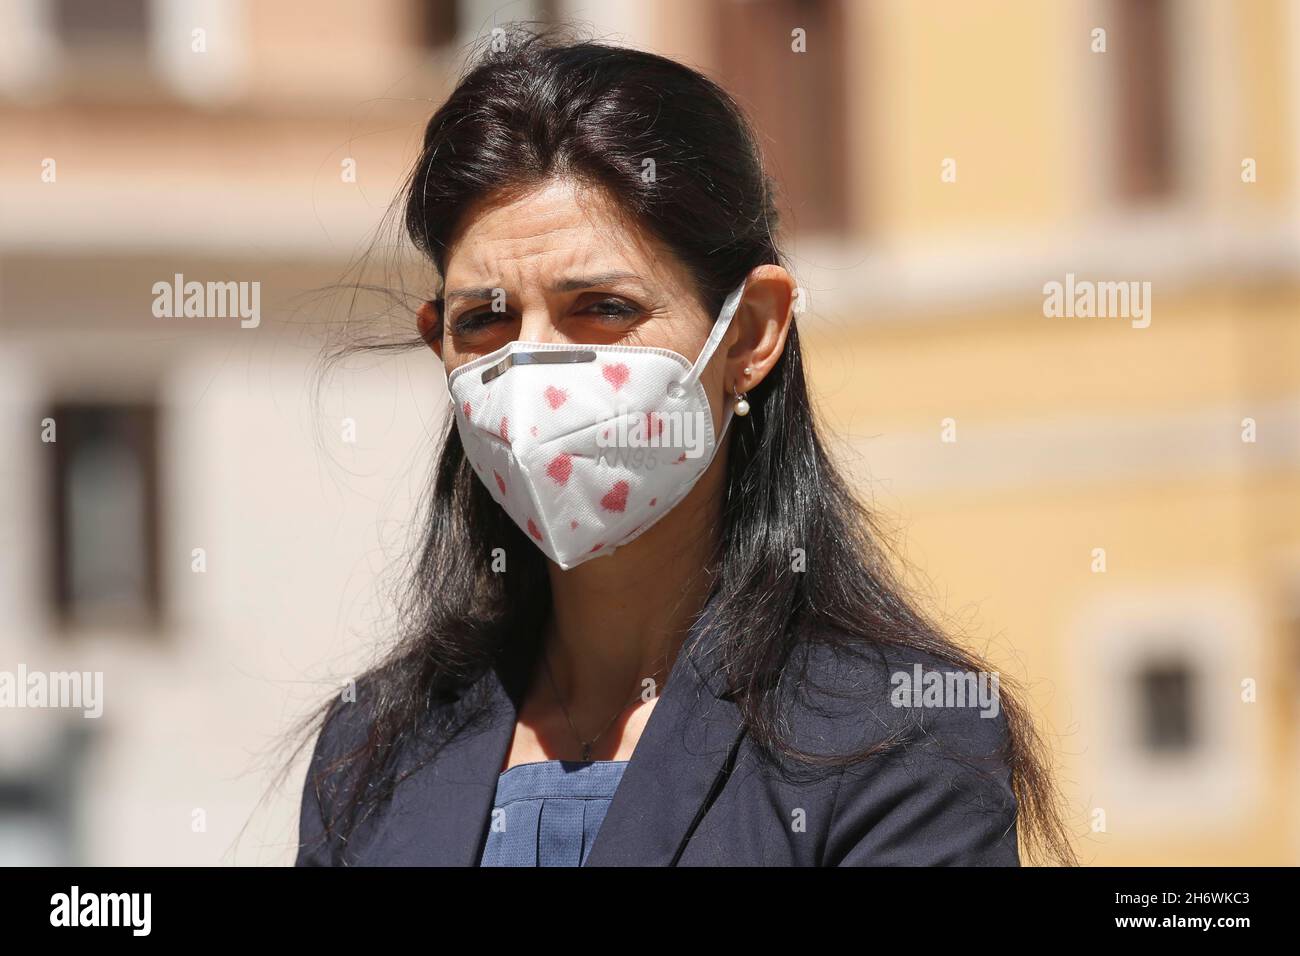 Italy, Rome, May 28, 2020 : Rome Mayor Virginia Raggi, wearing a safety mask, presents the new scooter service in sharing, during phase 2 contrast to Stock Photo